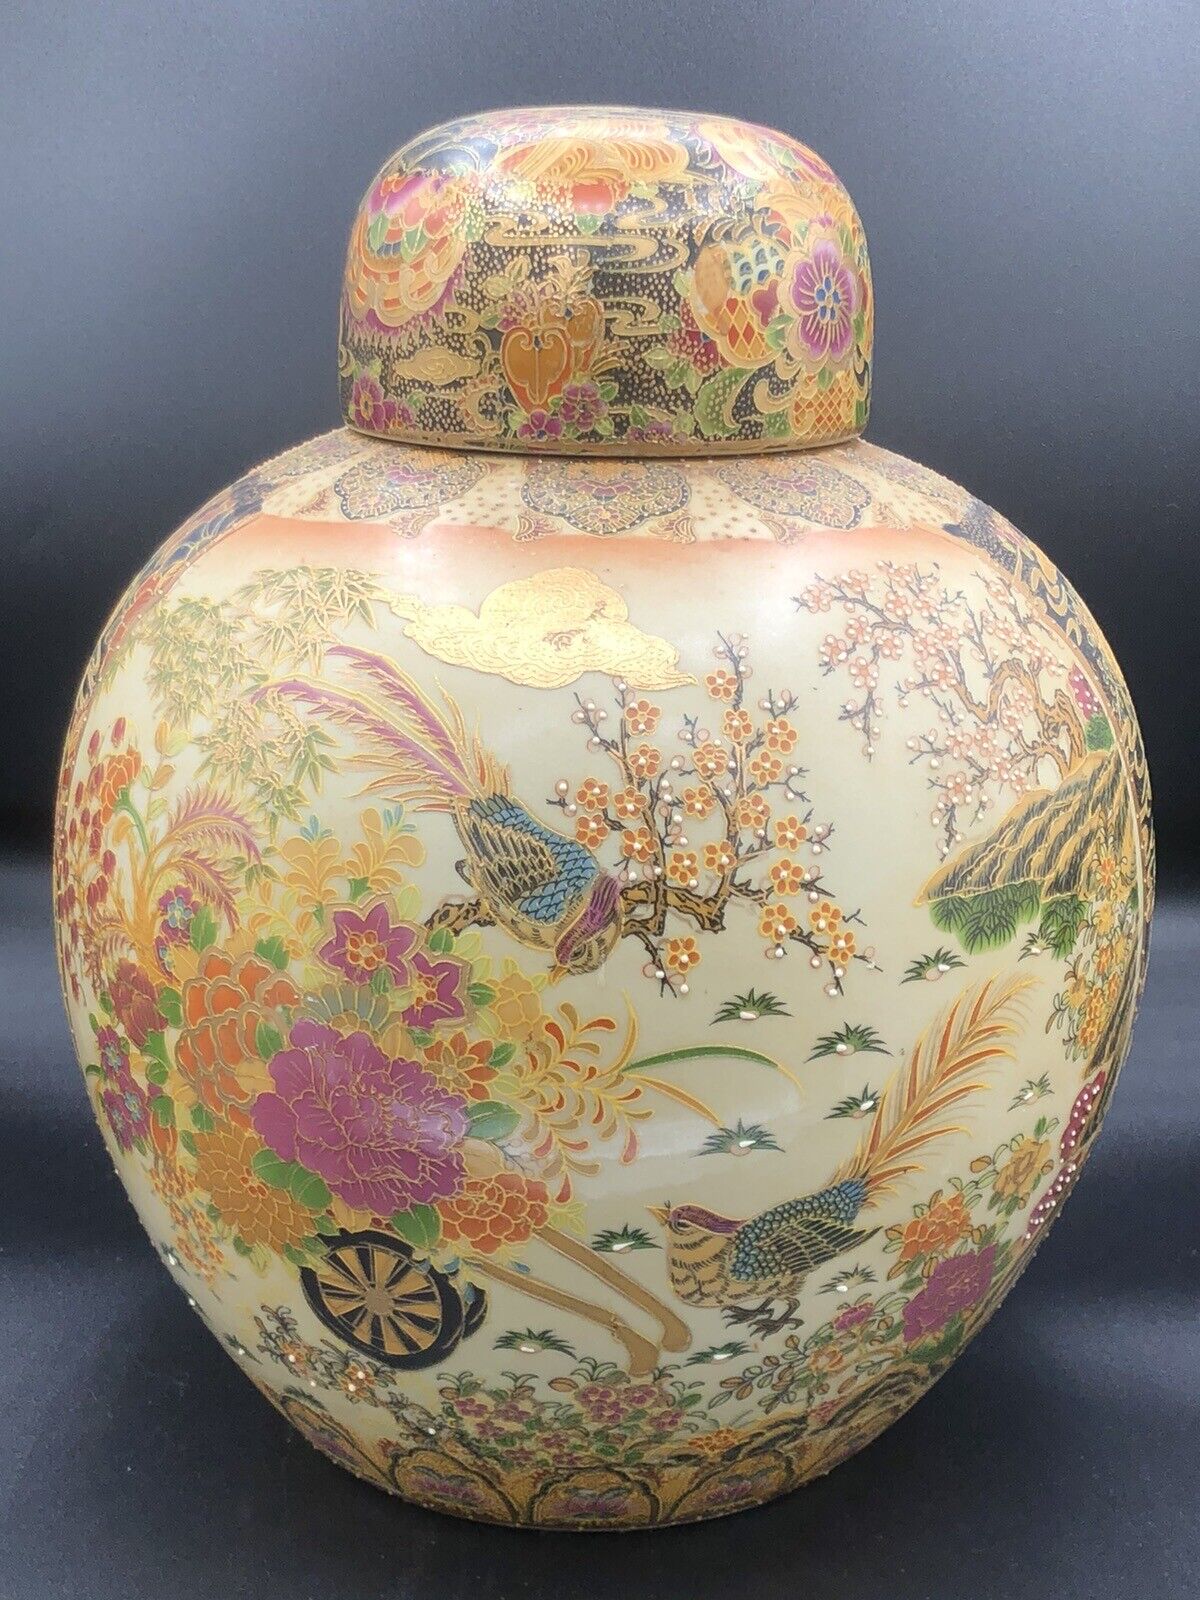 Antique Royal Satsuma Hand Painted Heavily Decorated Gilt Accents Jar 12”x10”